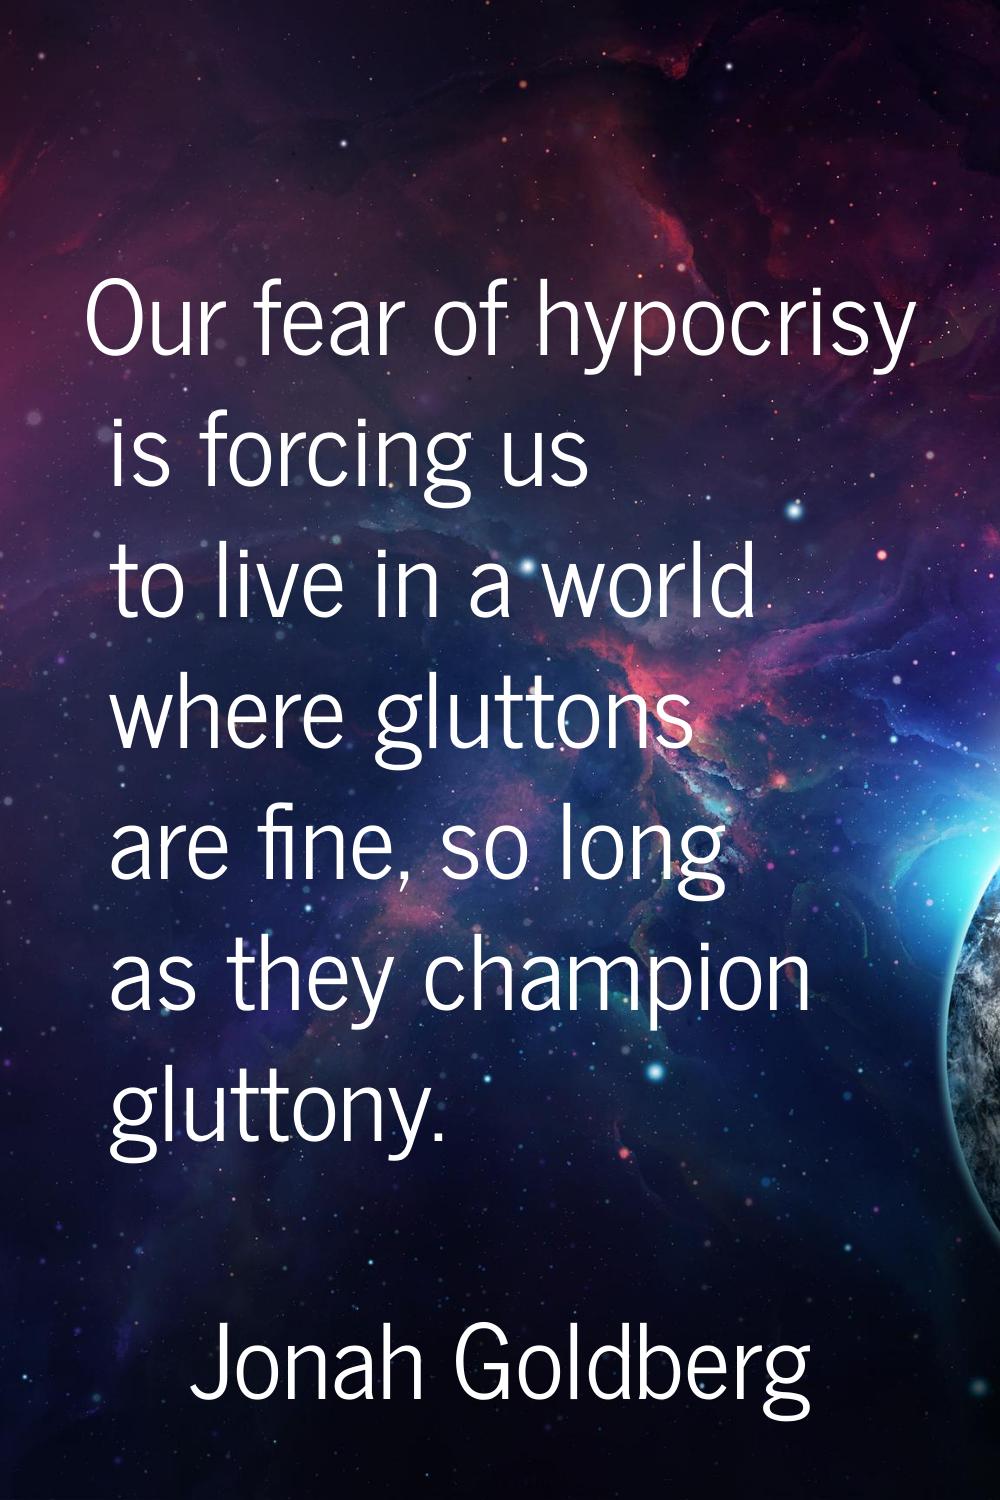 Our fear of hypocrisy is forcing us to live in a world where gluttons are fine, so long as they cha